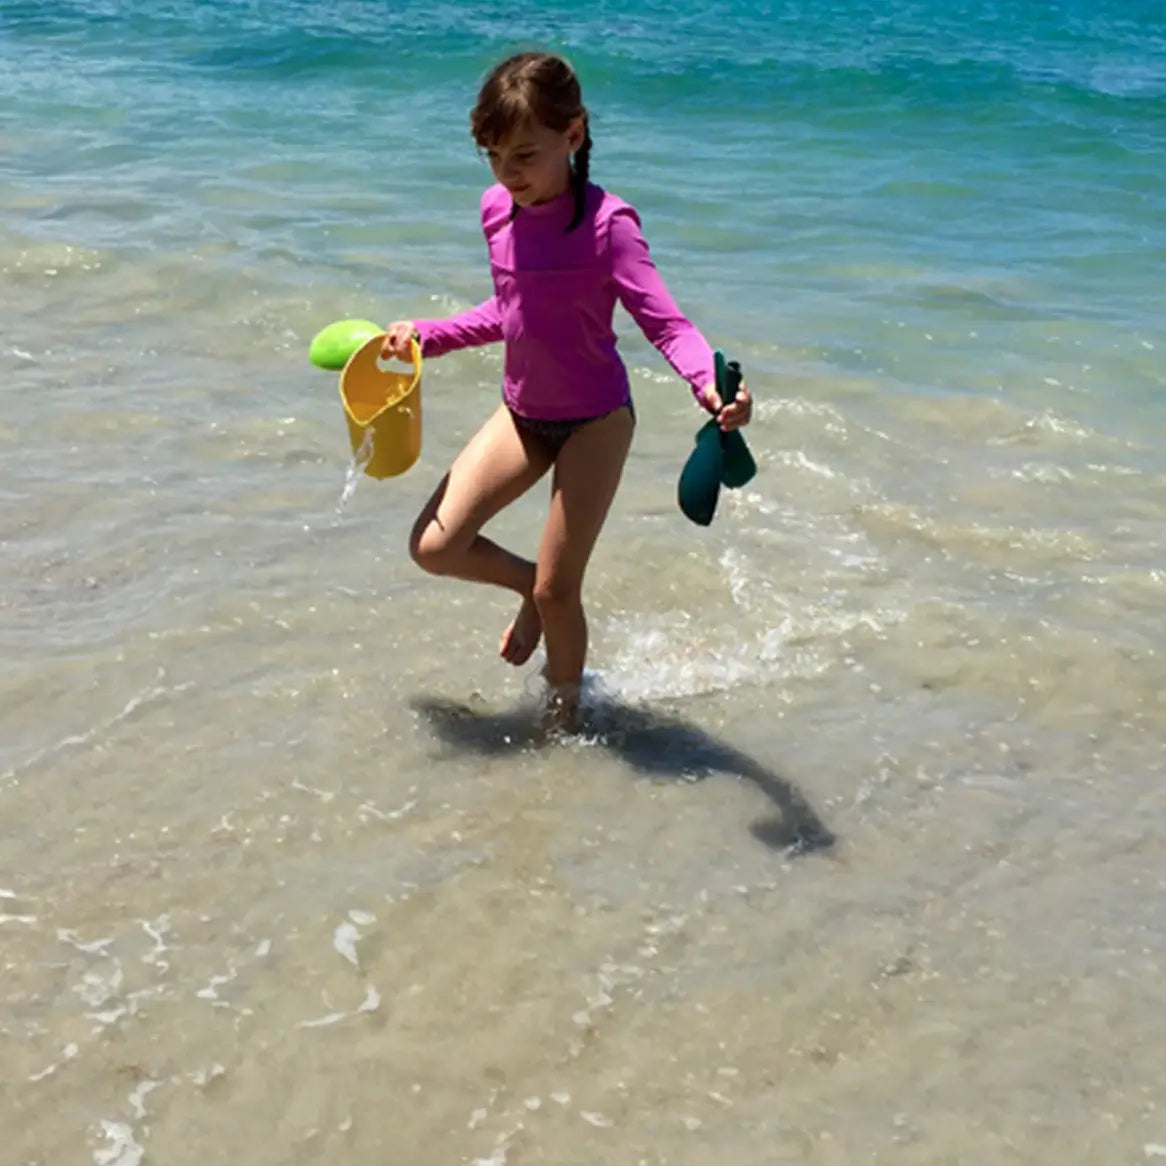 Child walking in the water holding bamboo sand bucket and play set